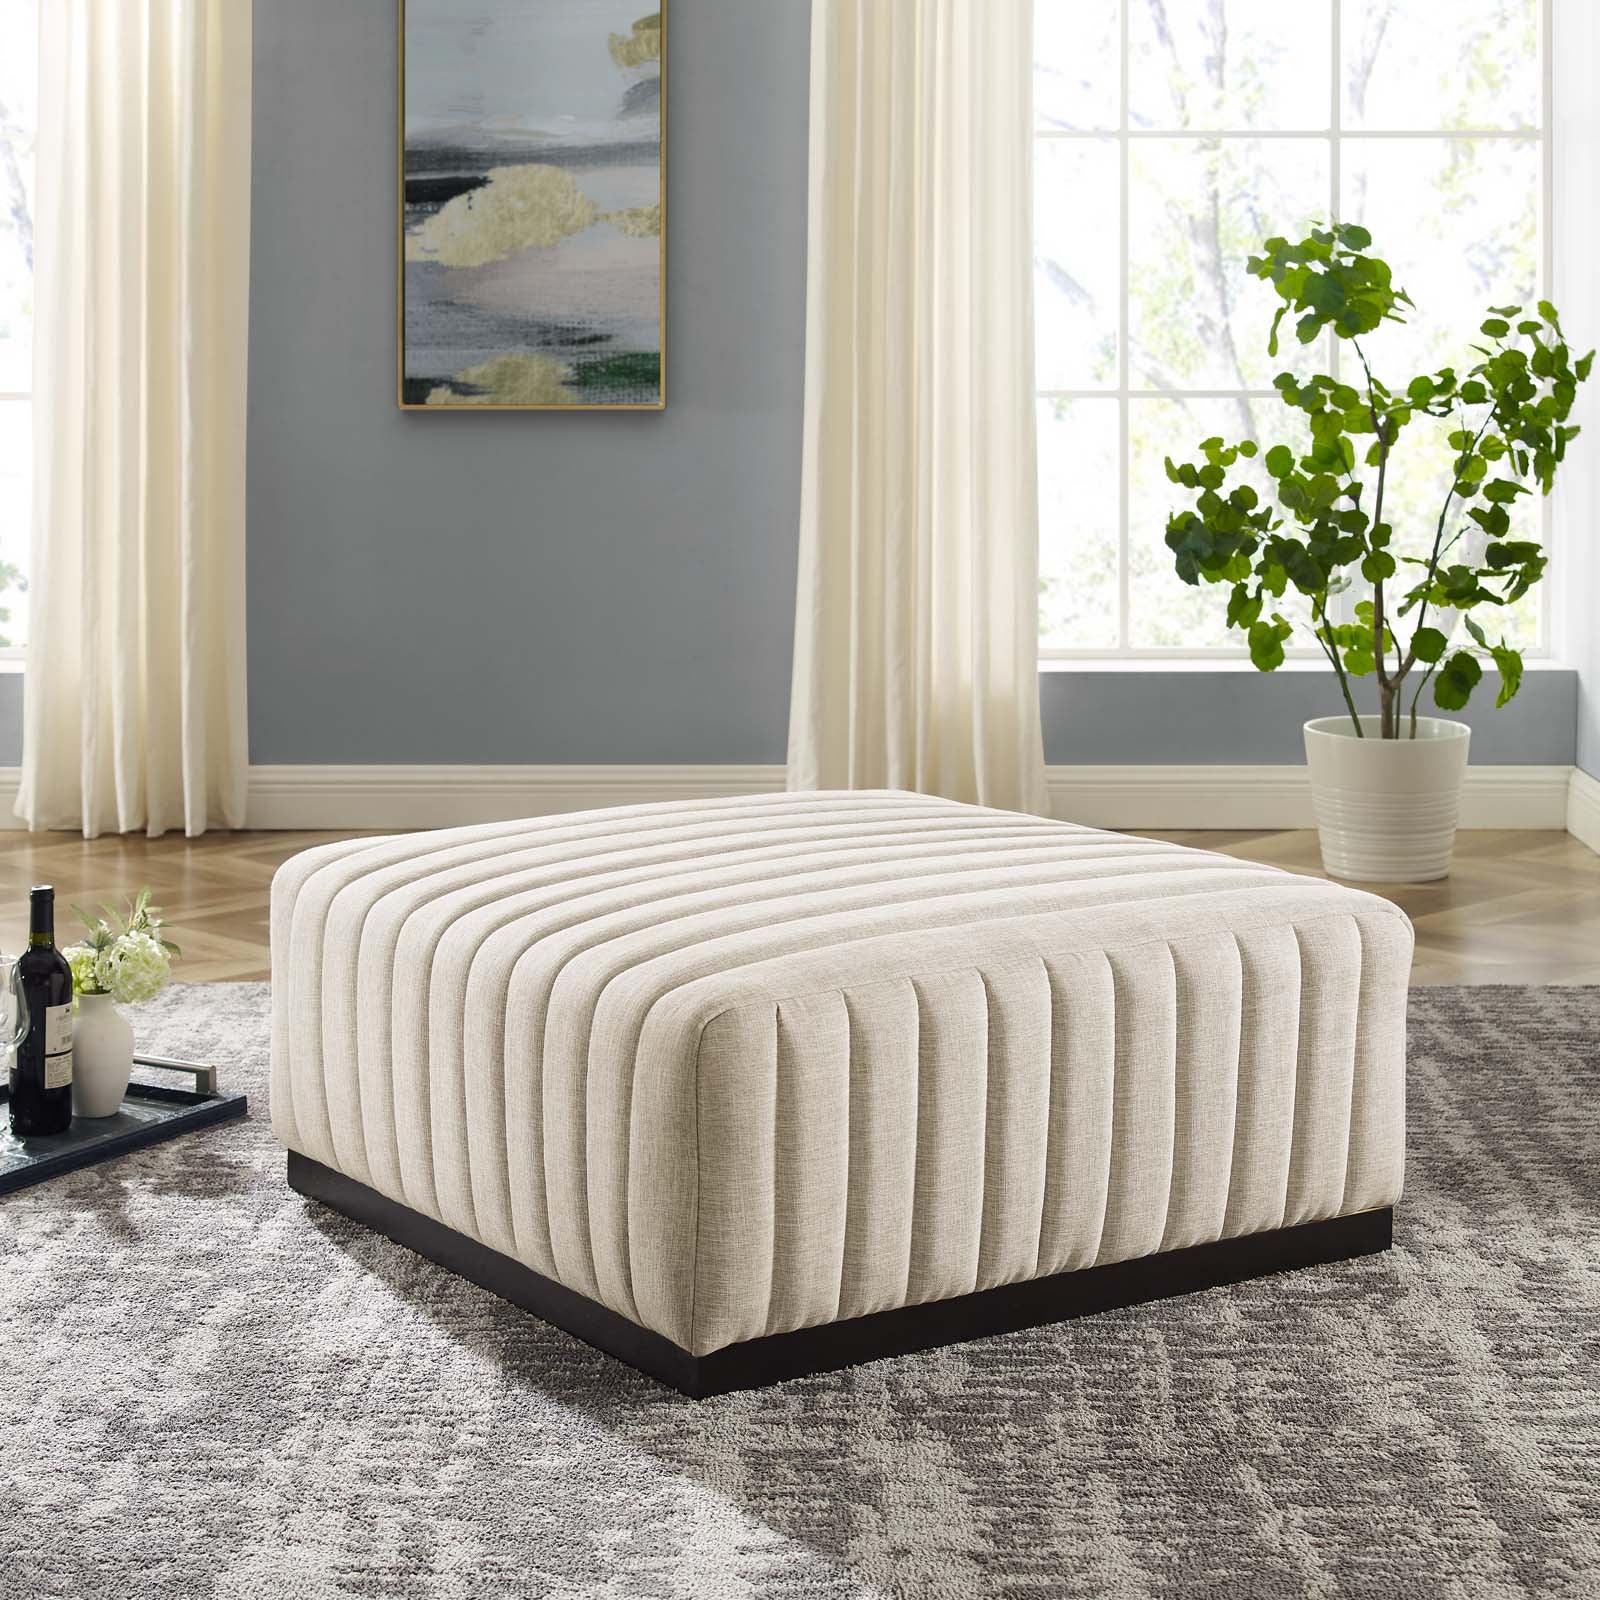 Conjure Channel Tufted Upholstered Fabric Ottoman - East Shore Modern Home Furnishings